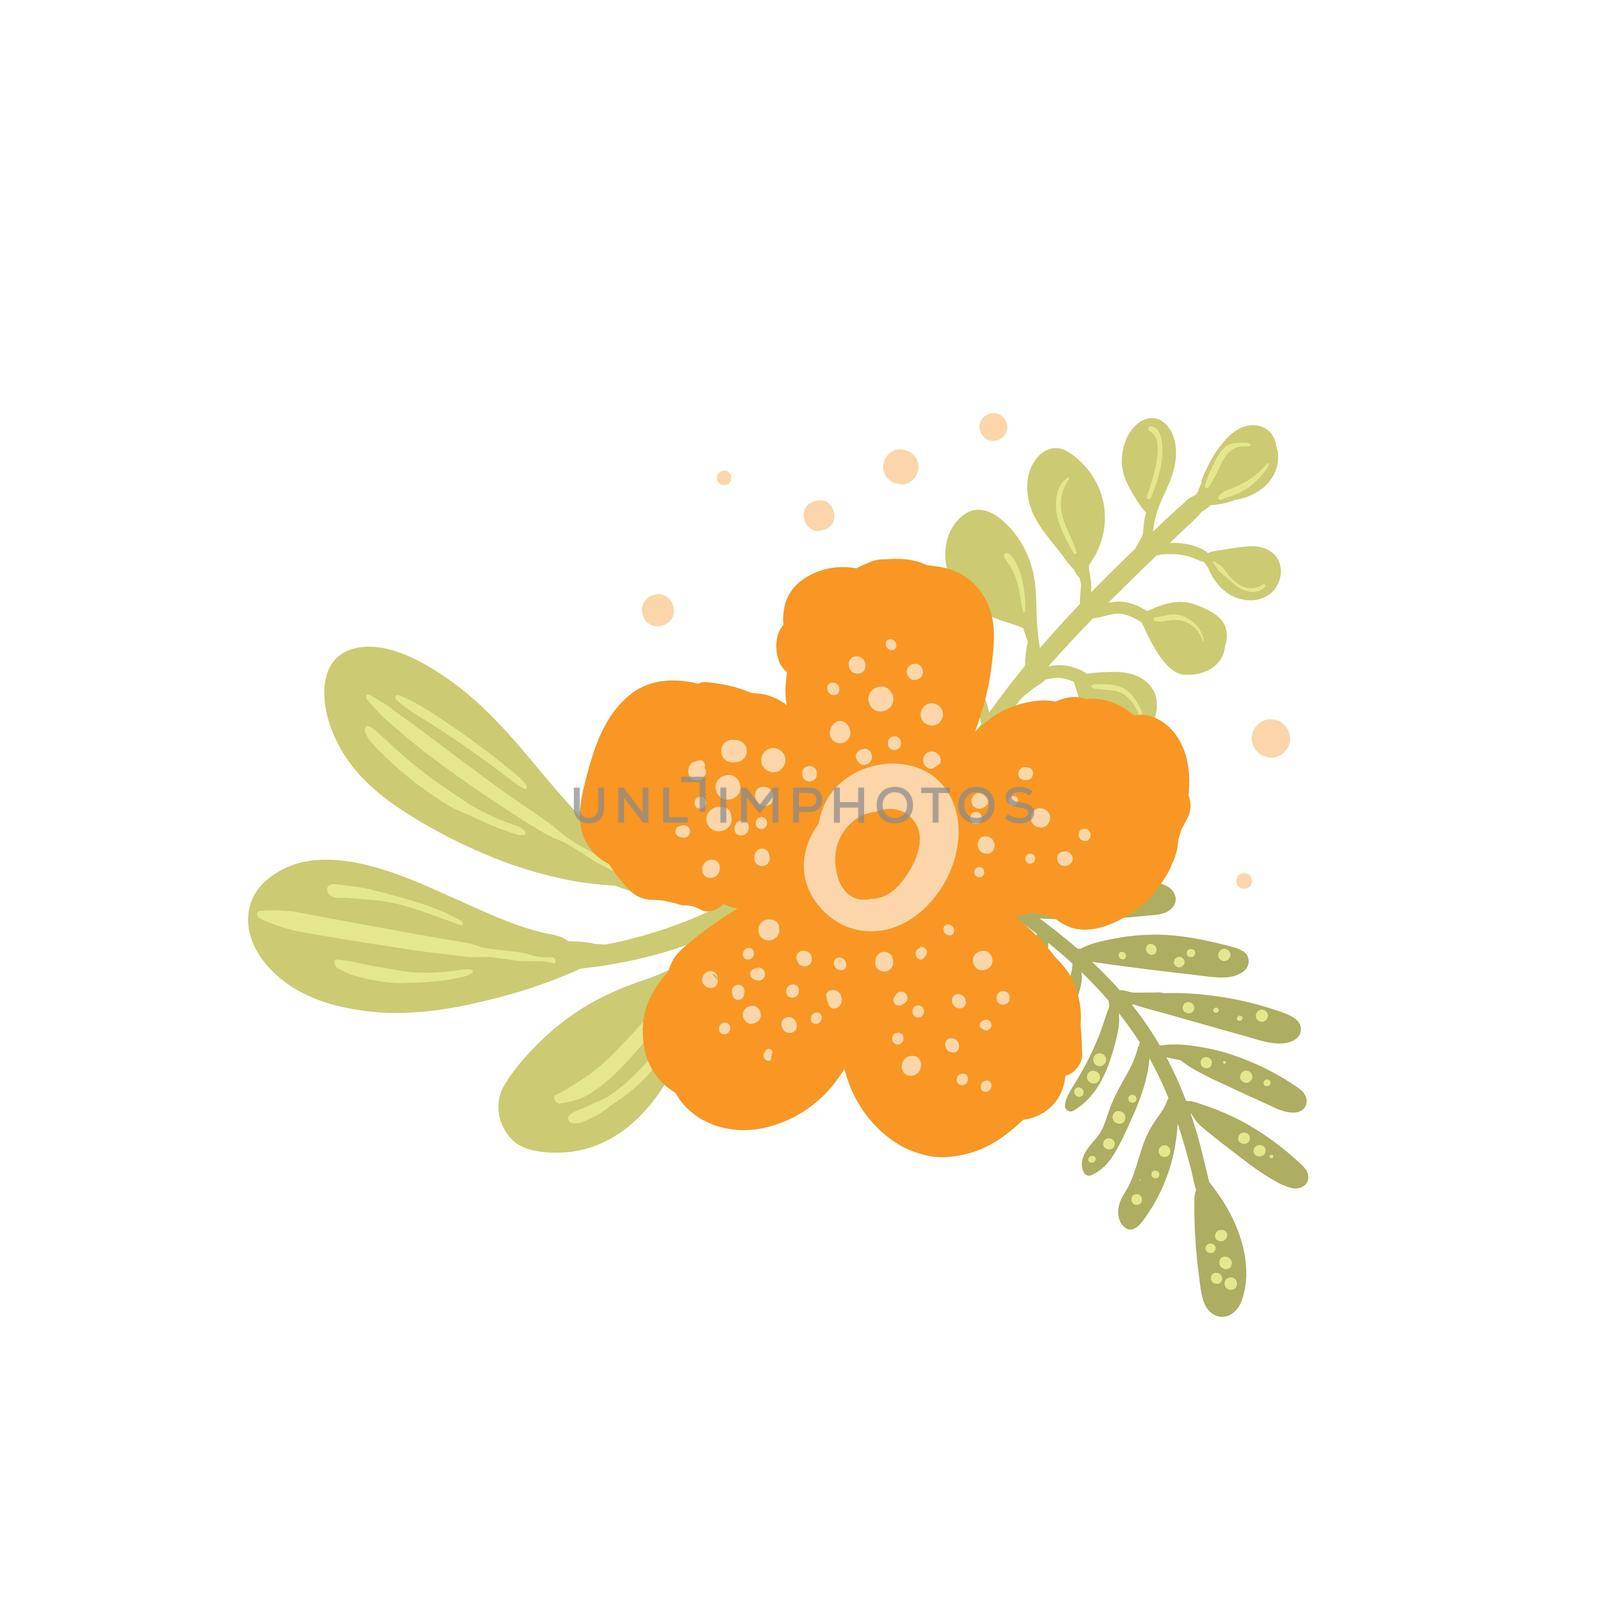 Floral set based on traditional folk art ornaments. Isolated orange and green flowers. Scandinavian style. Sweden nordic style. Vector illustration. Simple minimalistic nature element.